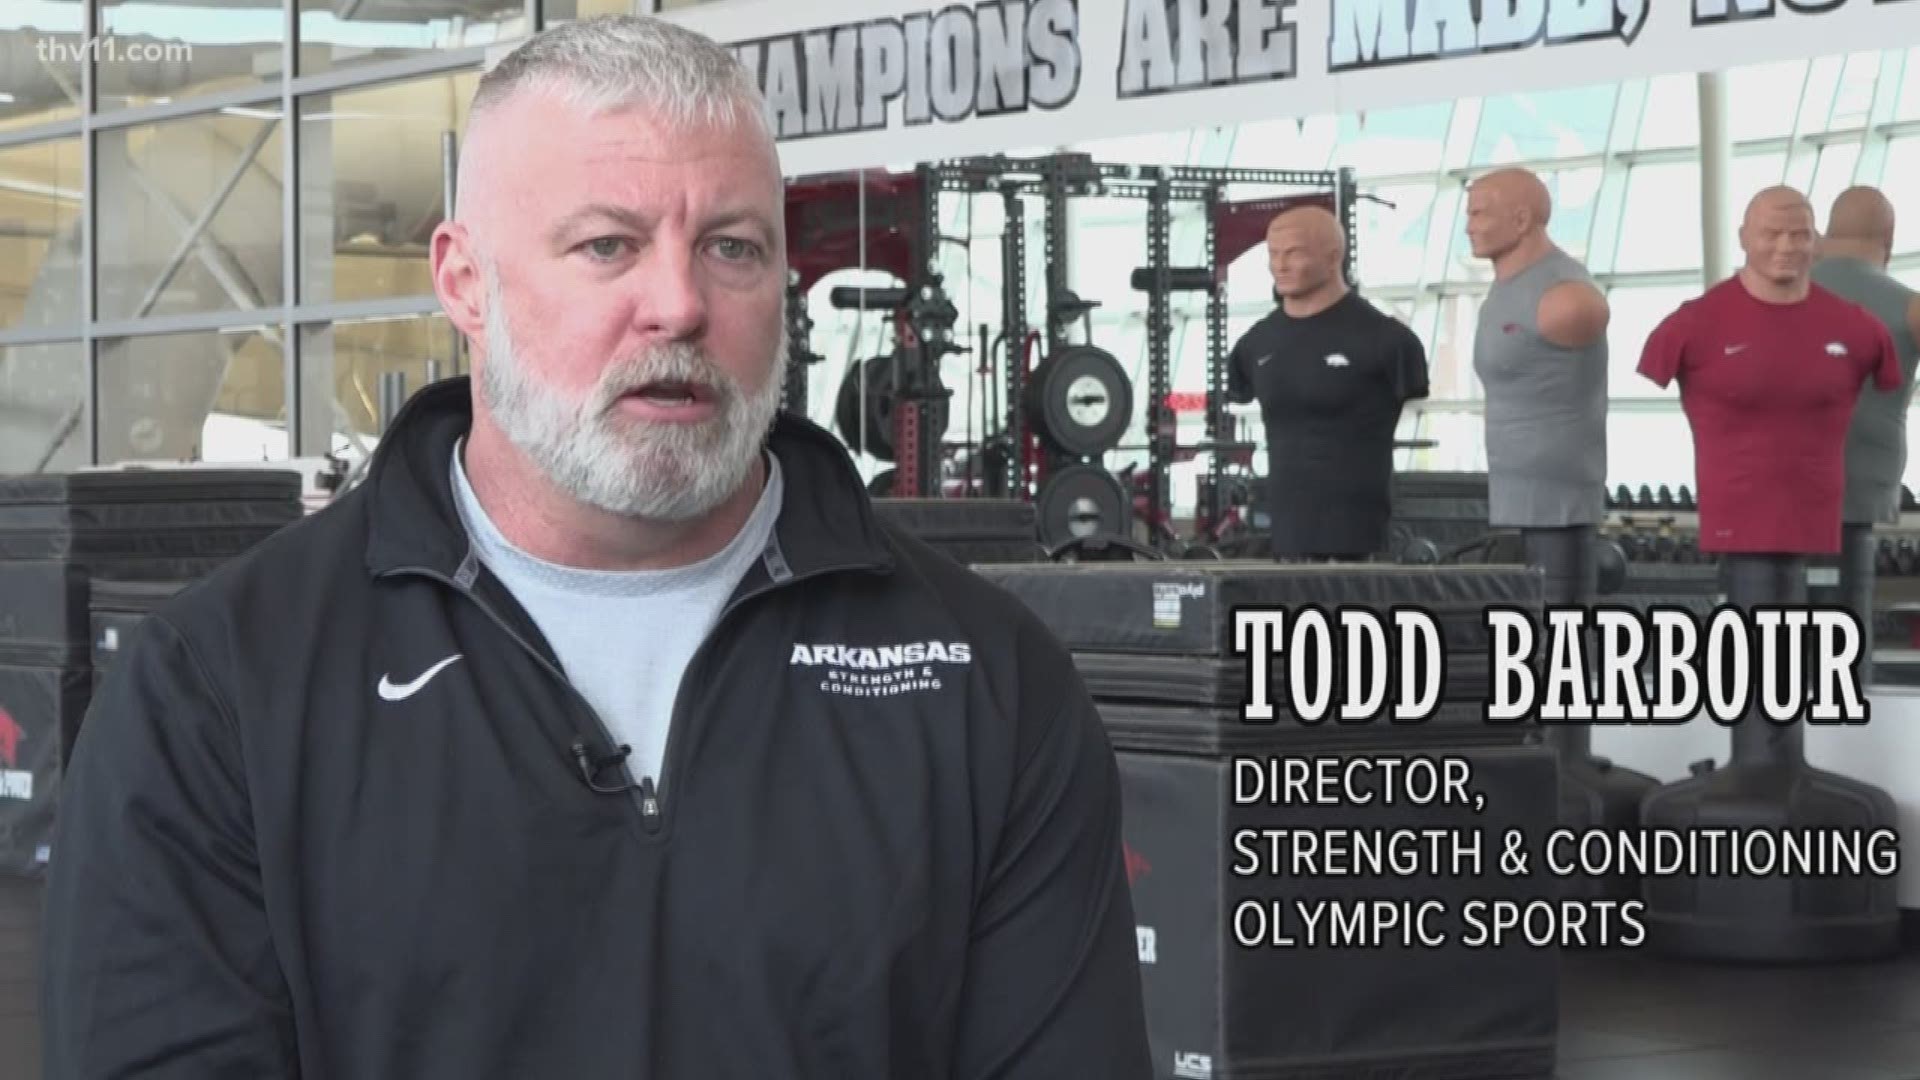 After suffering a medical emergency last year, the Arkansas Strength and Conditioning Coach, has found that his strength to go on lies in the bonds he's created with his teams.